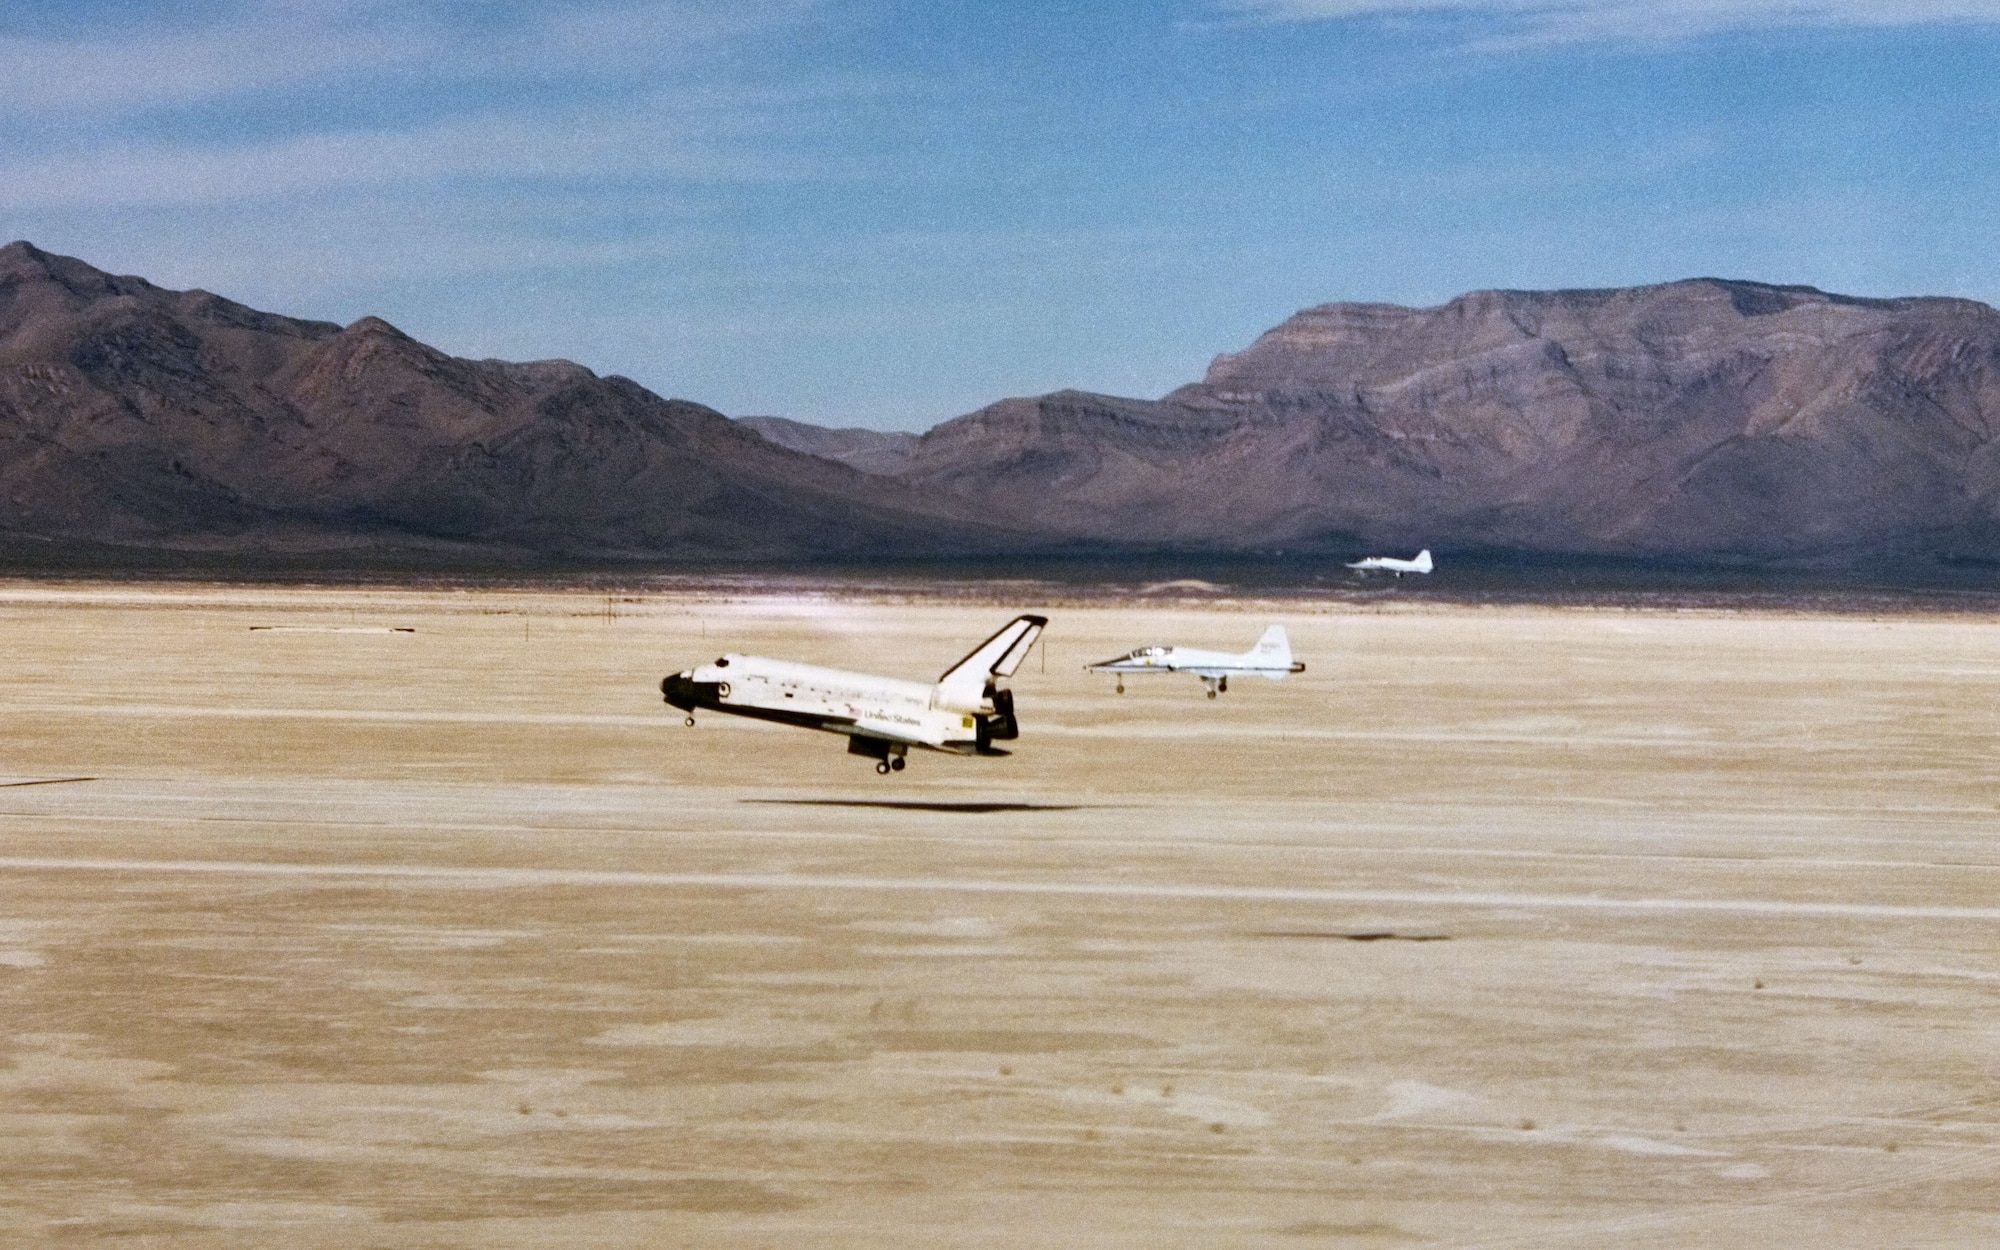 Two T-38 chase planes follow Space Shuttle Columbia as it lands at Northrop Strip in White Sands, New Mexico, ending its mission STS-3. (Photo NASA)